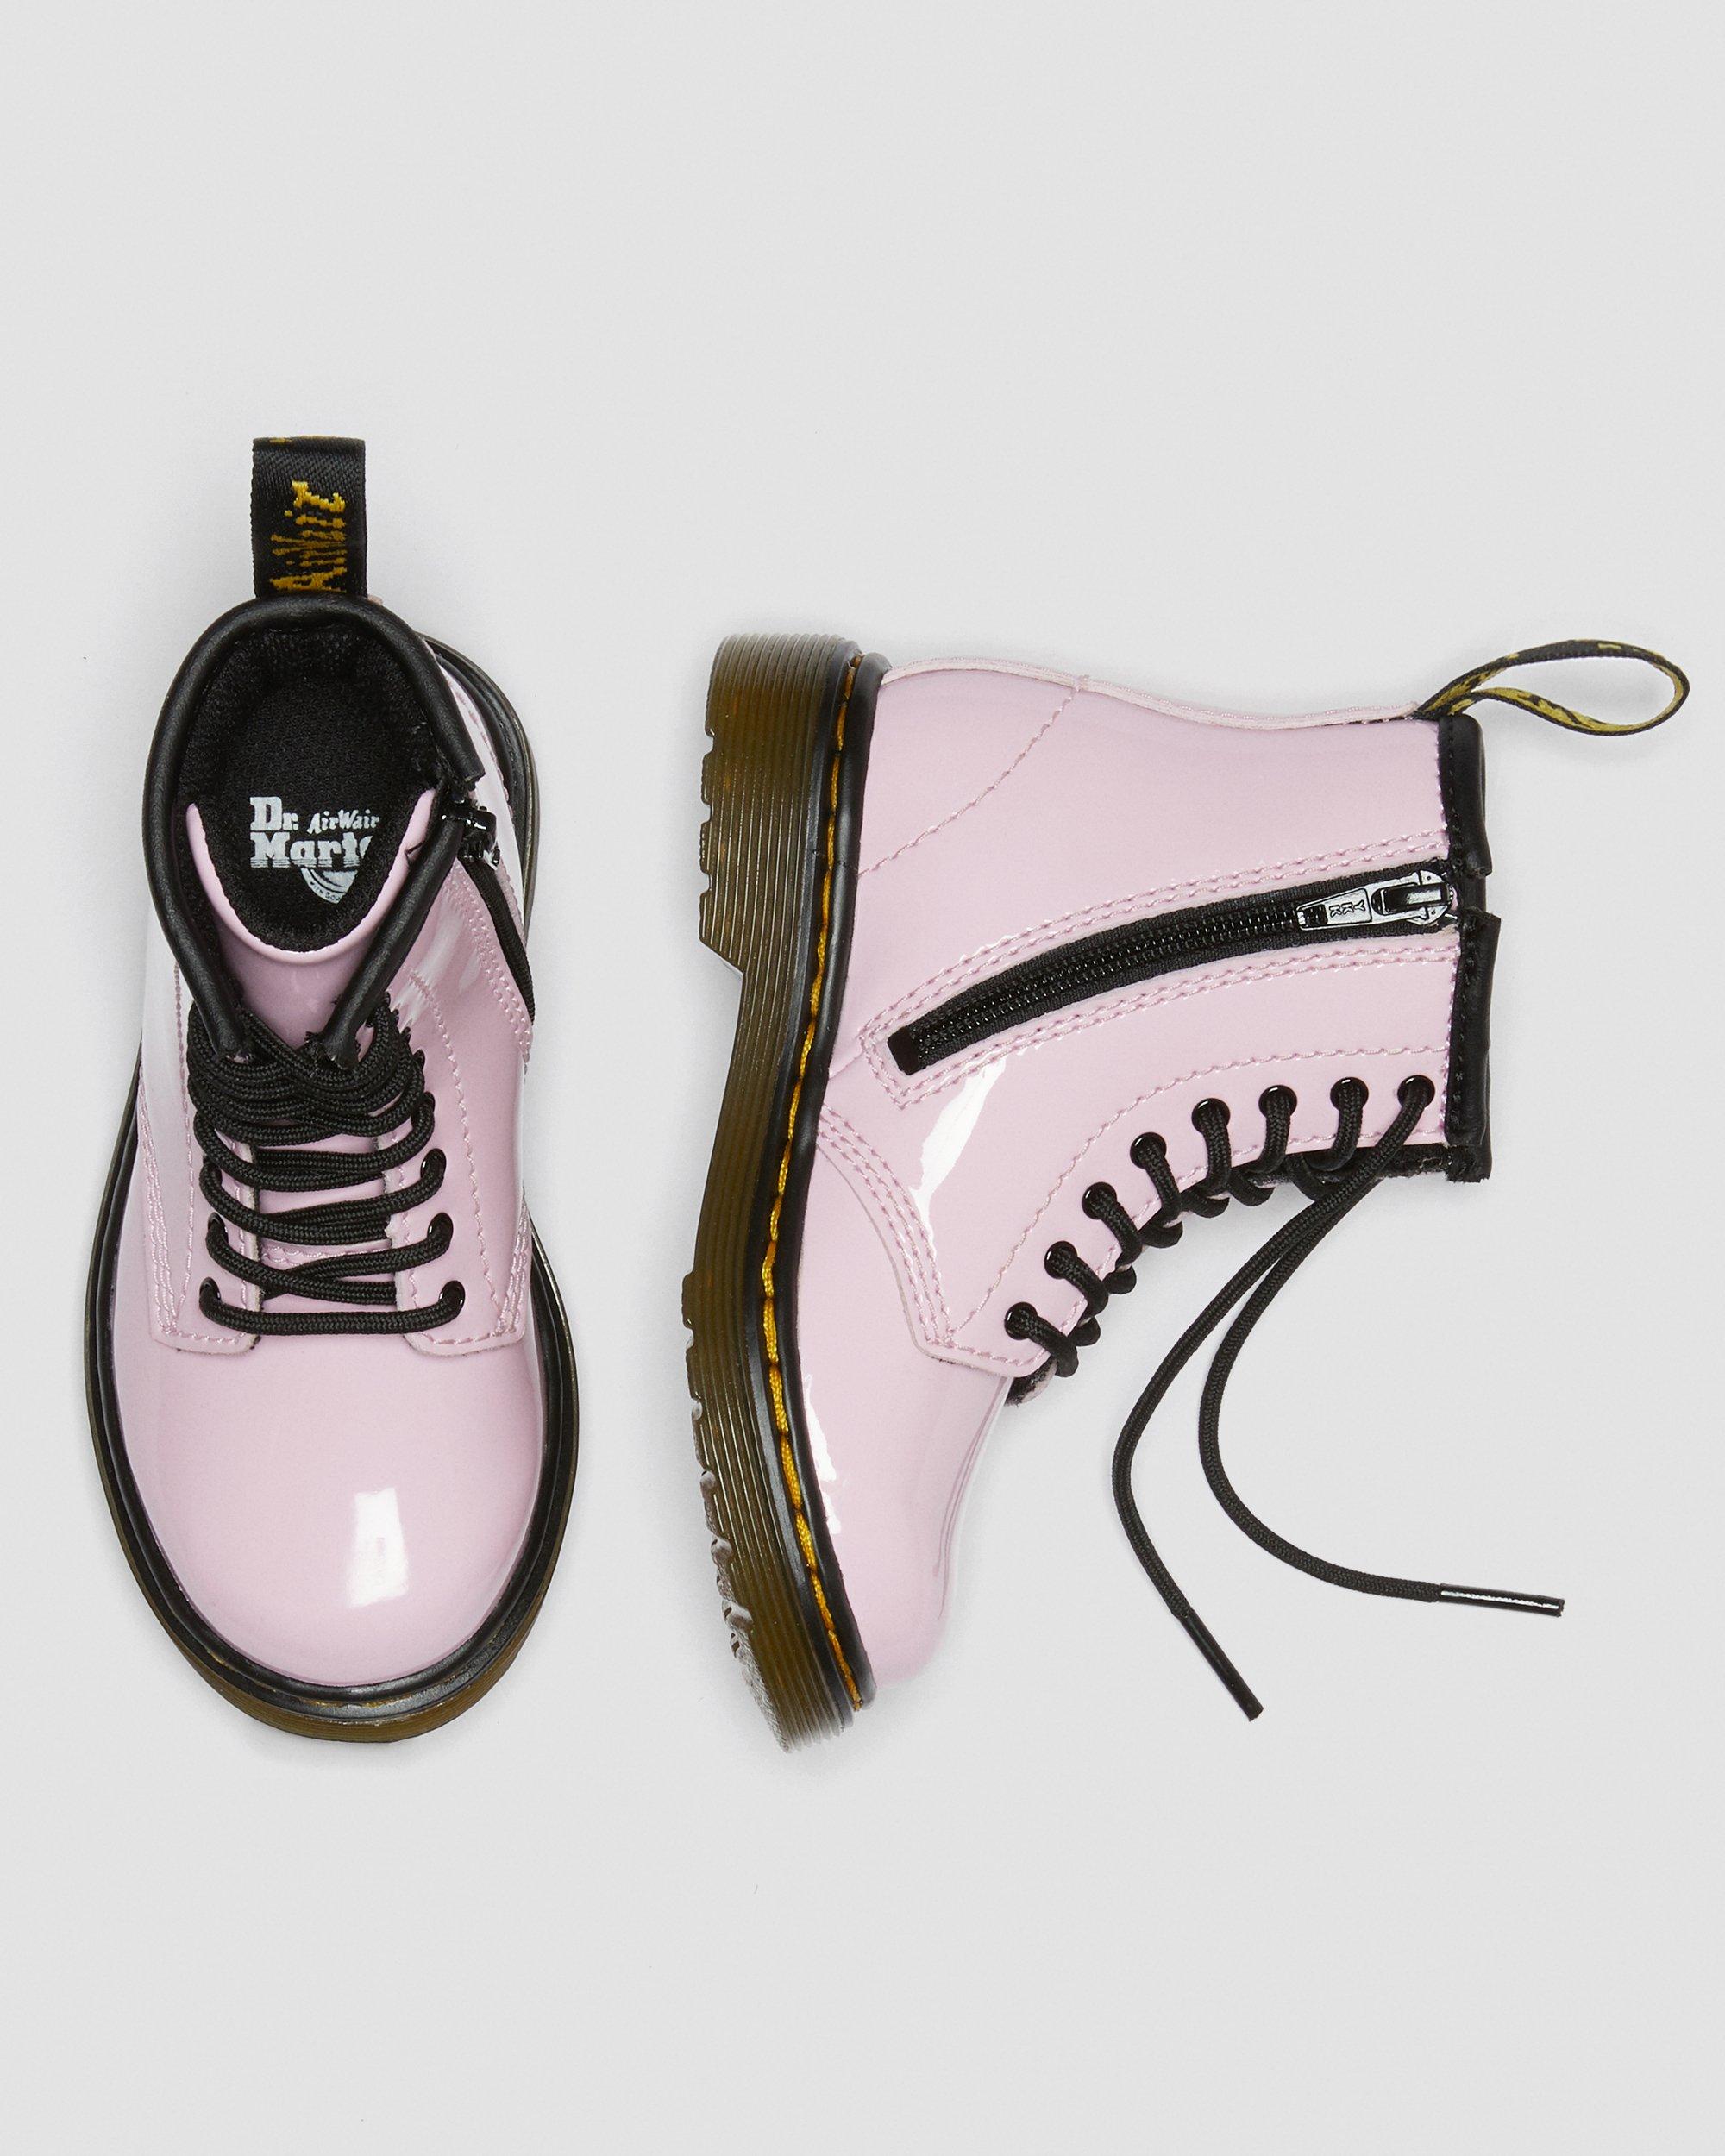 Toddler 1460 Patent Leather Lace Up Boots in Pale Pink | Dr. Martens